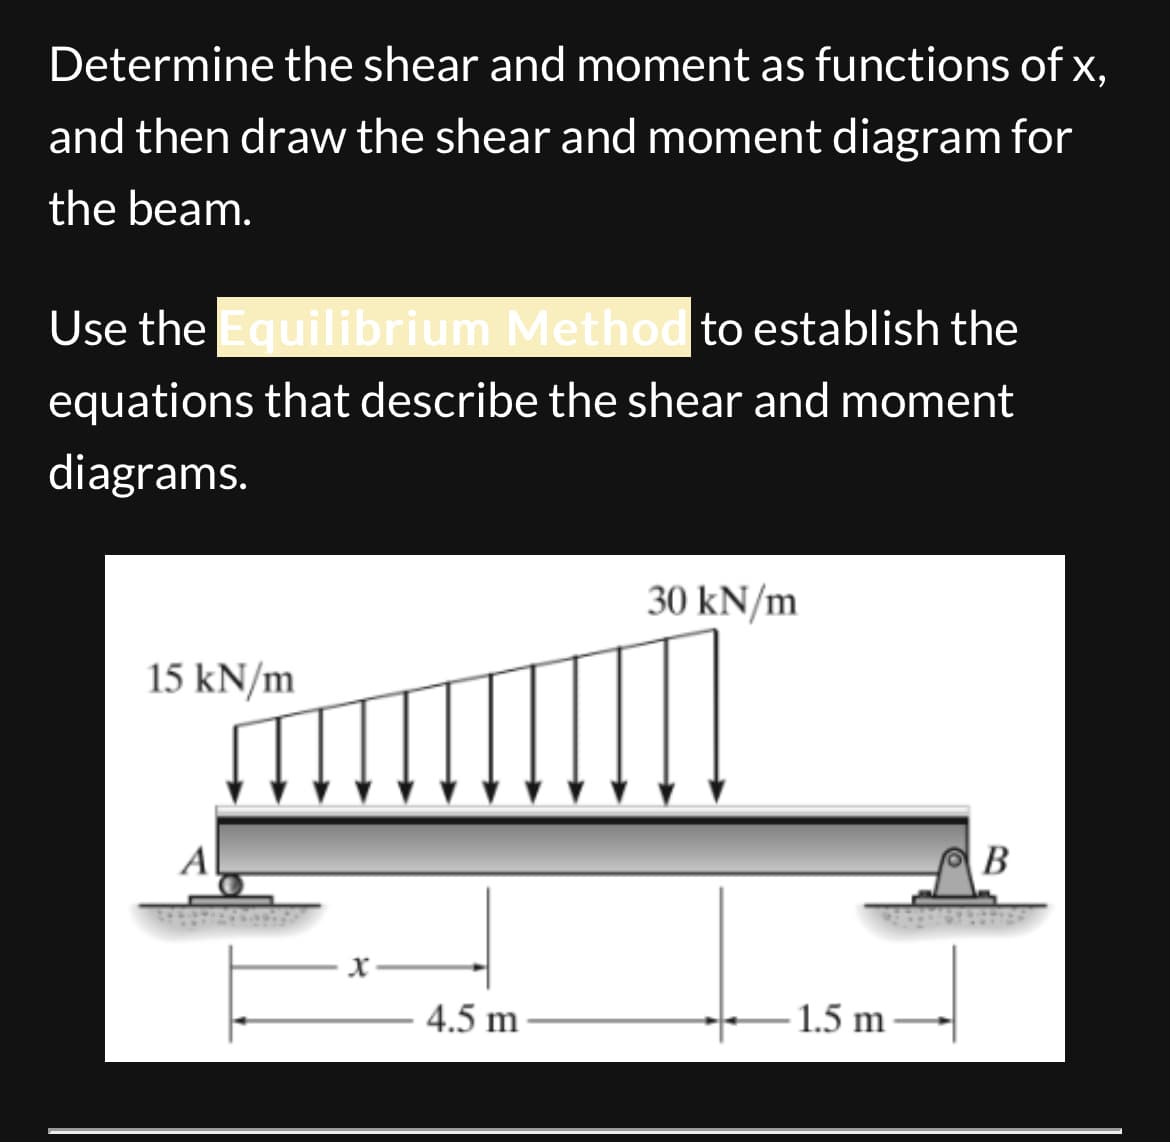 Determine the shear and moment as functions of x,
and then draw the shear and moment diagram for
the beam.
Use the Equilibrium Method to establish the
equations that describe the shear and moment
diagrams.
15 kN/m
A
30 kN/m
4.5 m
1.5 m
B